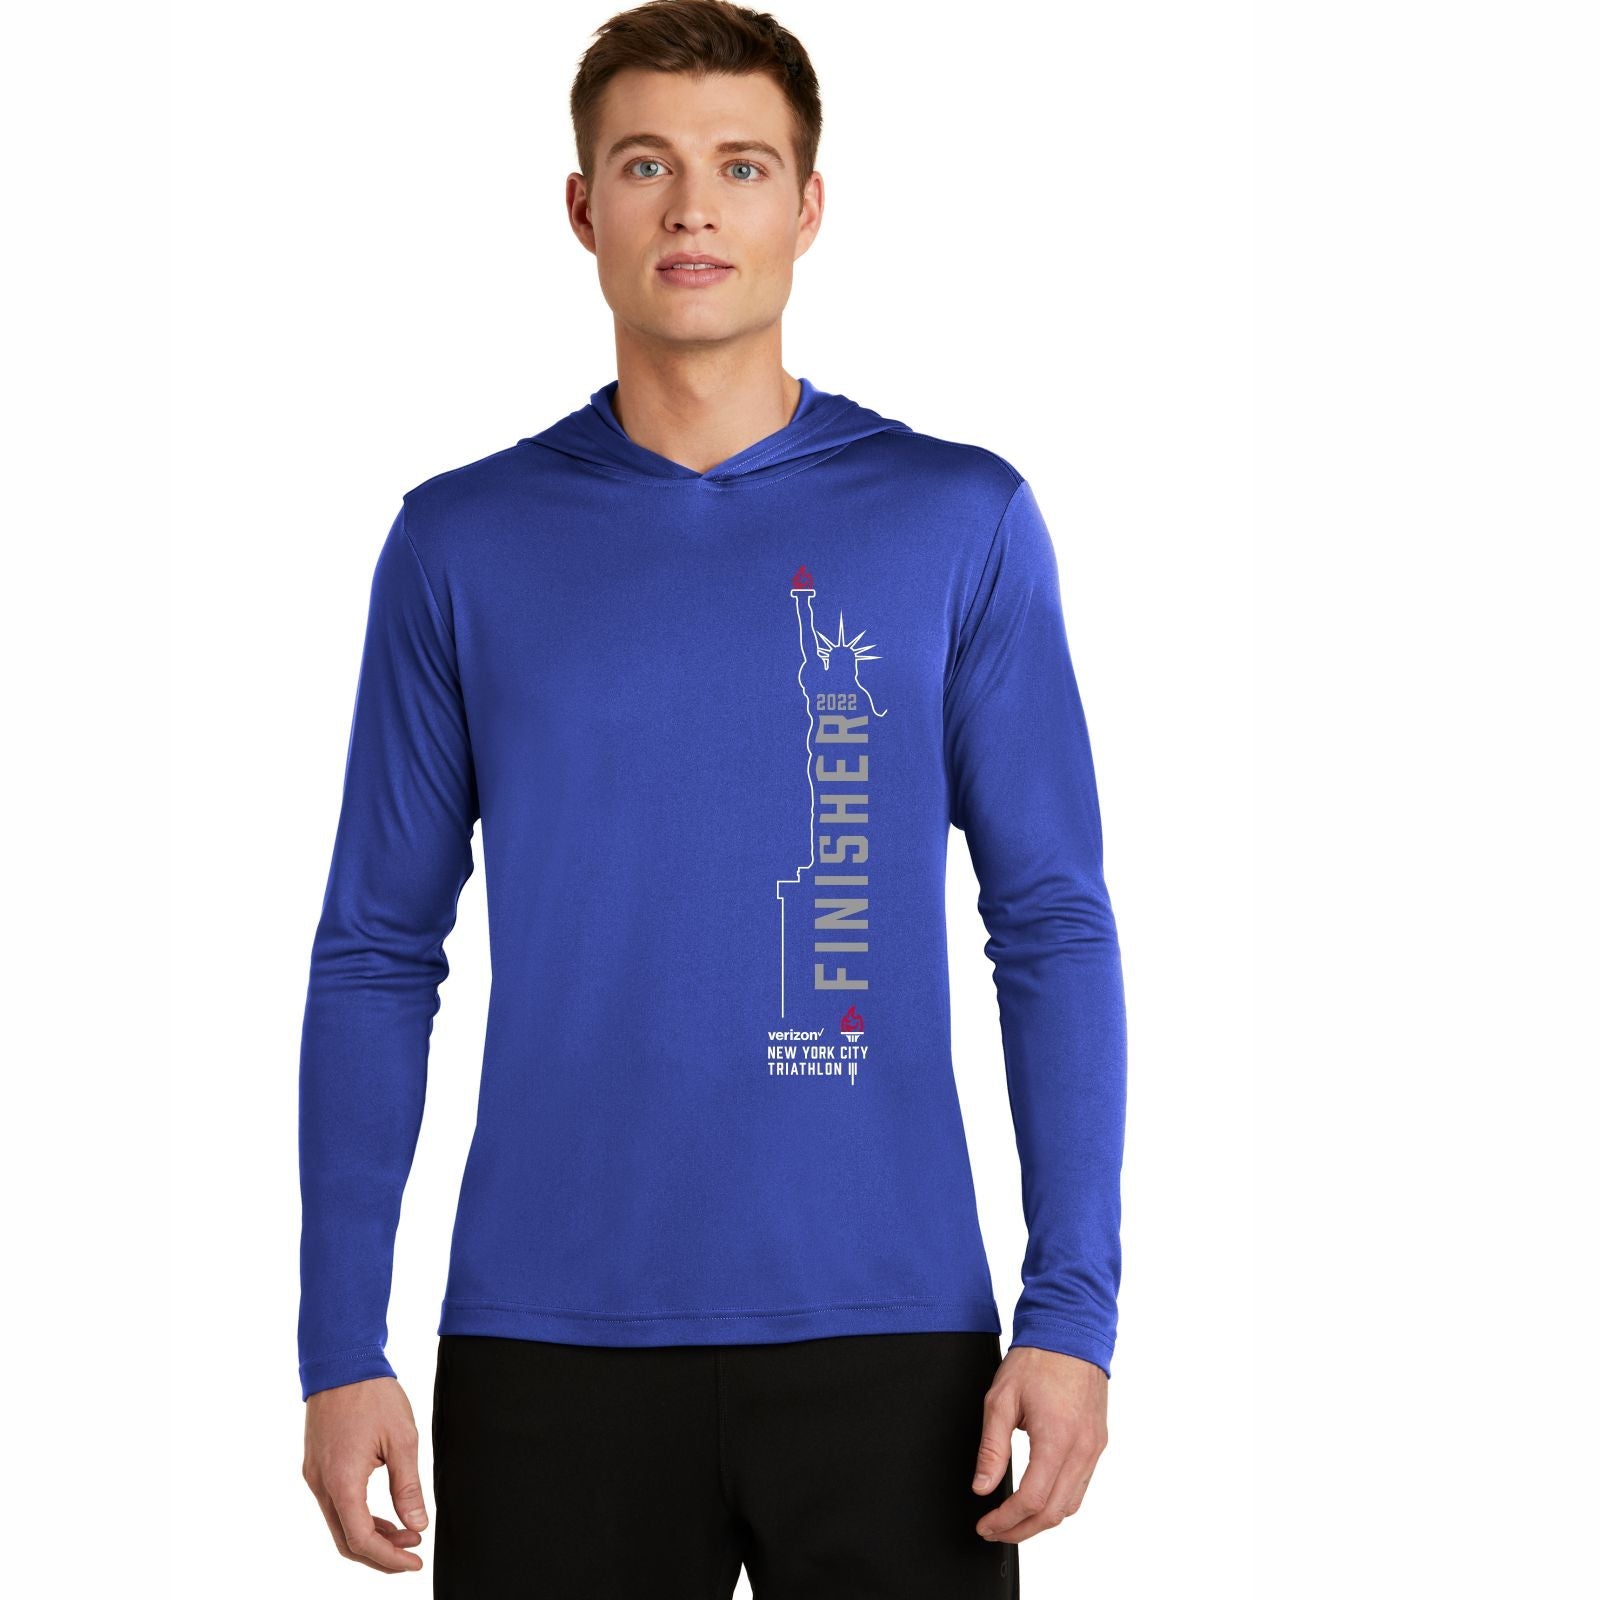 Men's LS Tech Hooded Tee - Royal - Names Finisher 22